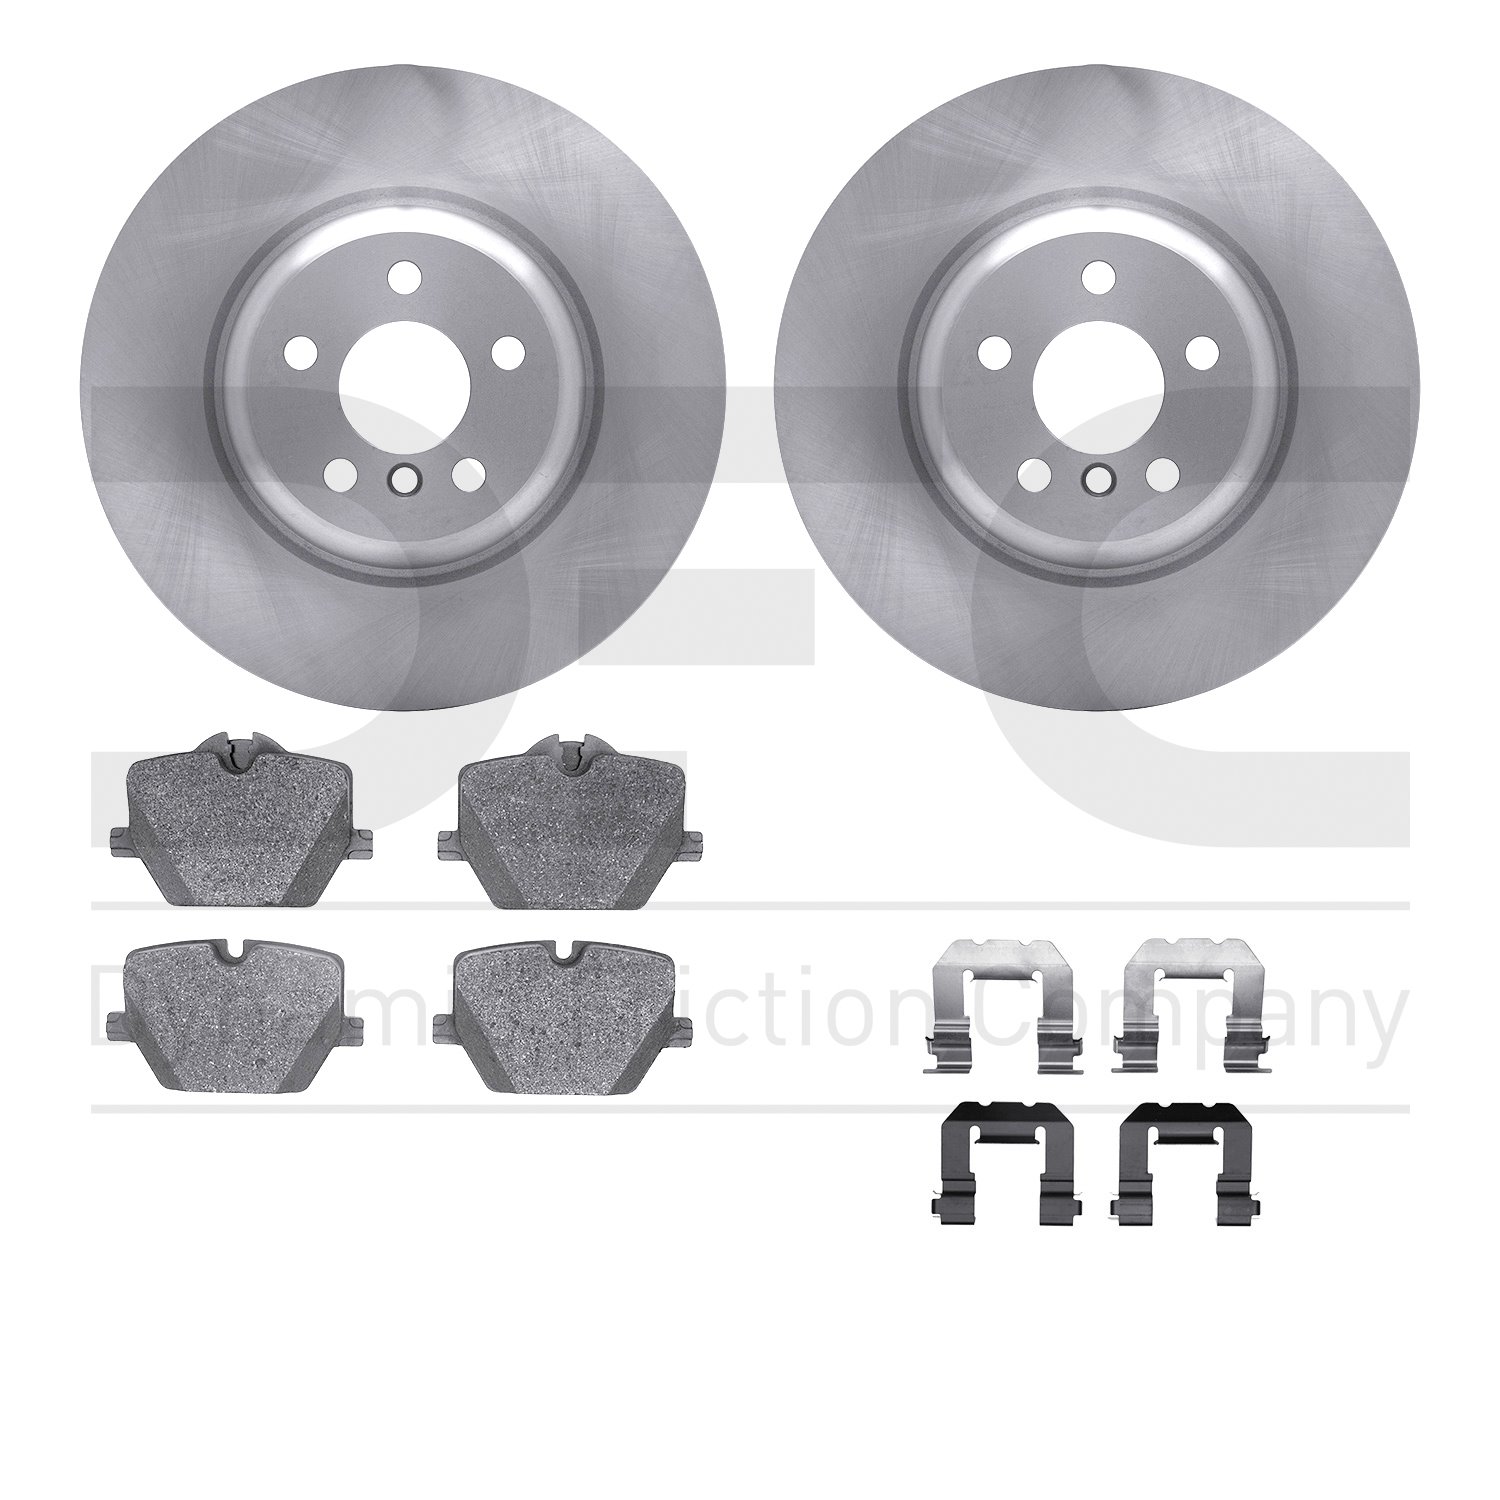 6512-31620 Brake Rotors w/5000 Advanced Brake Pads Kit with Hardware, Fits Select Multiple Makes/Models, Position: Rear